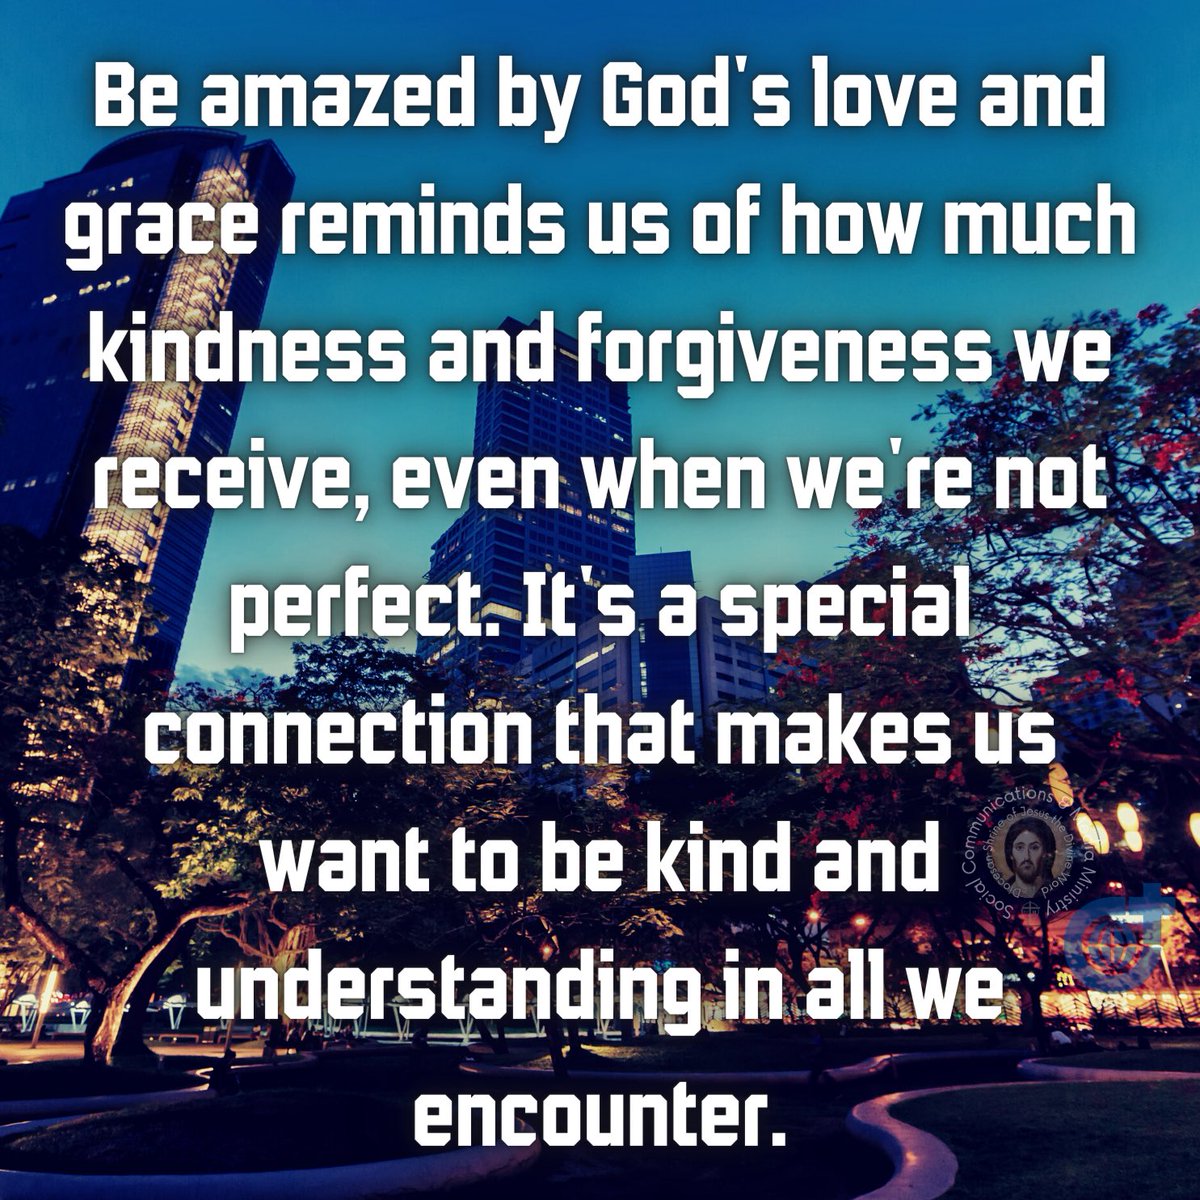 Be amazed by God's love and grace reminds us of how much kindness and forgiveness we receive, even when we're not perfect. 

#GodsLoveAndGrace #InAwe 
#GratefulHeart #DivineKindness #UnconditionalLove

***
#SVD #DSJDW #DivineWord
#WitnessToTheWord #SVDmission 
#SVDmisyonero